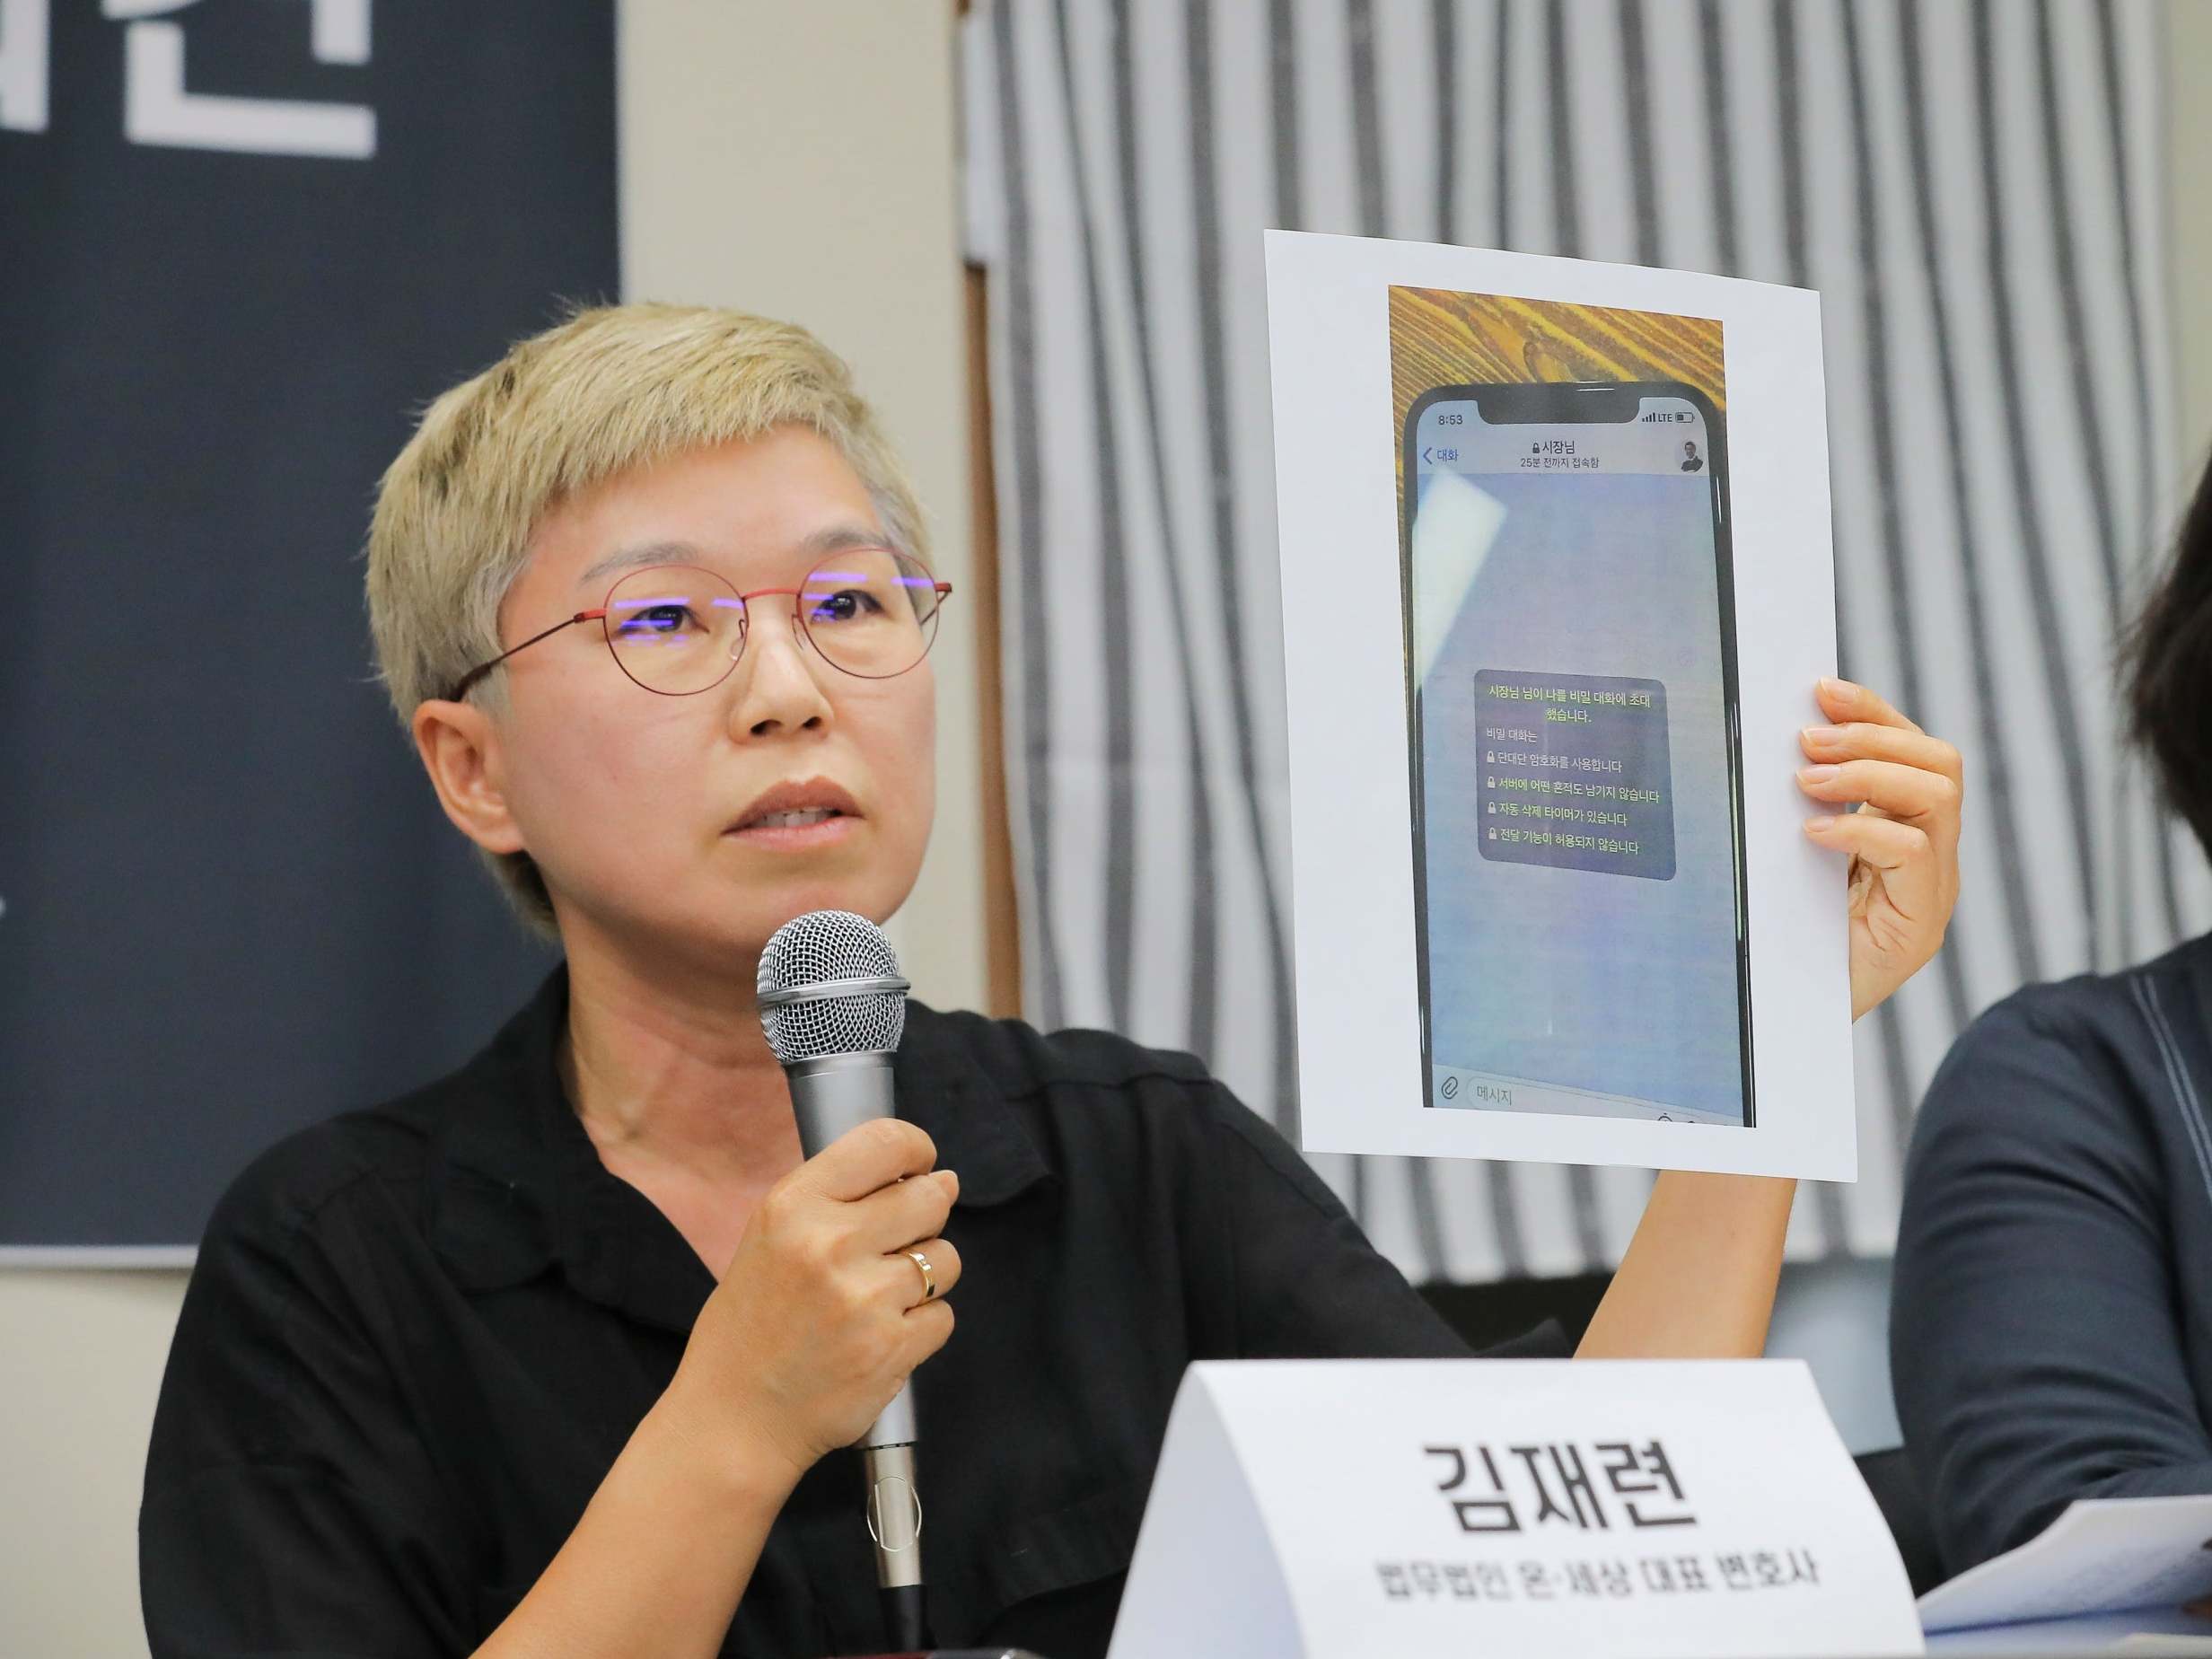 Kim Jae-ryun, a lawyer for a former secretary of the late Seoul mayor Park Won-soon, explains the alleged sexual harassment case during a news conference in Seoul, South Korea, 13 July 2020.